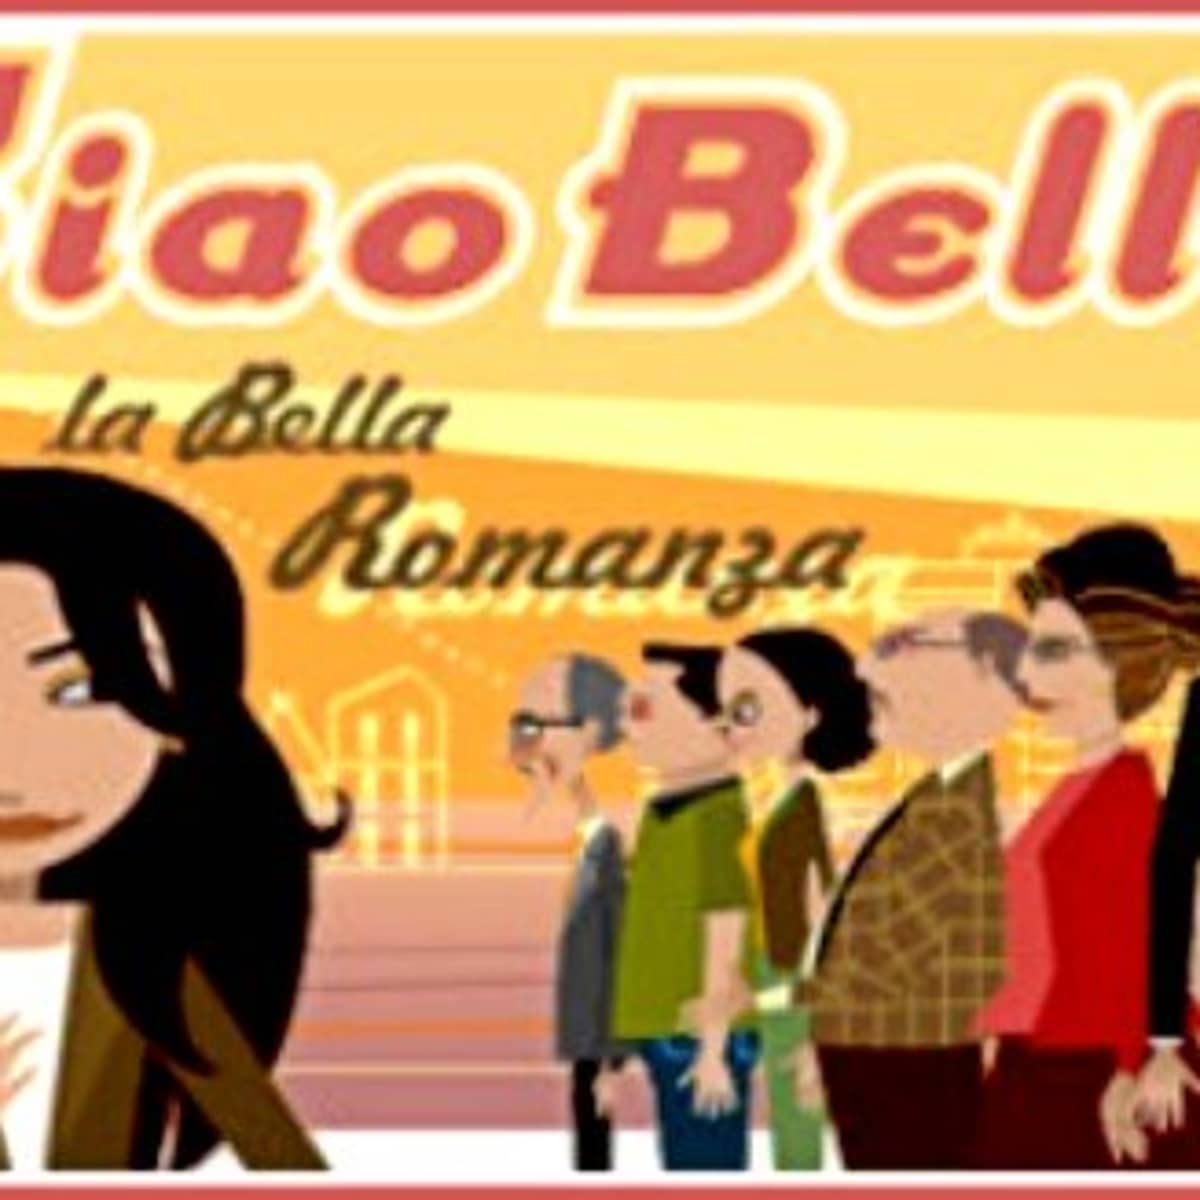 ciao bella game online